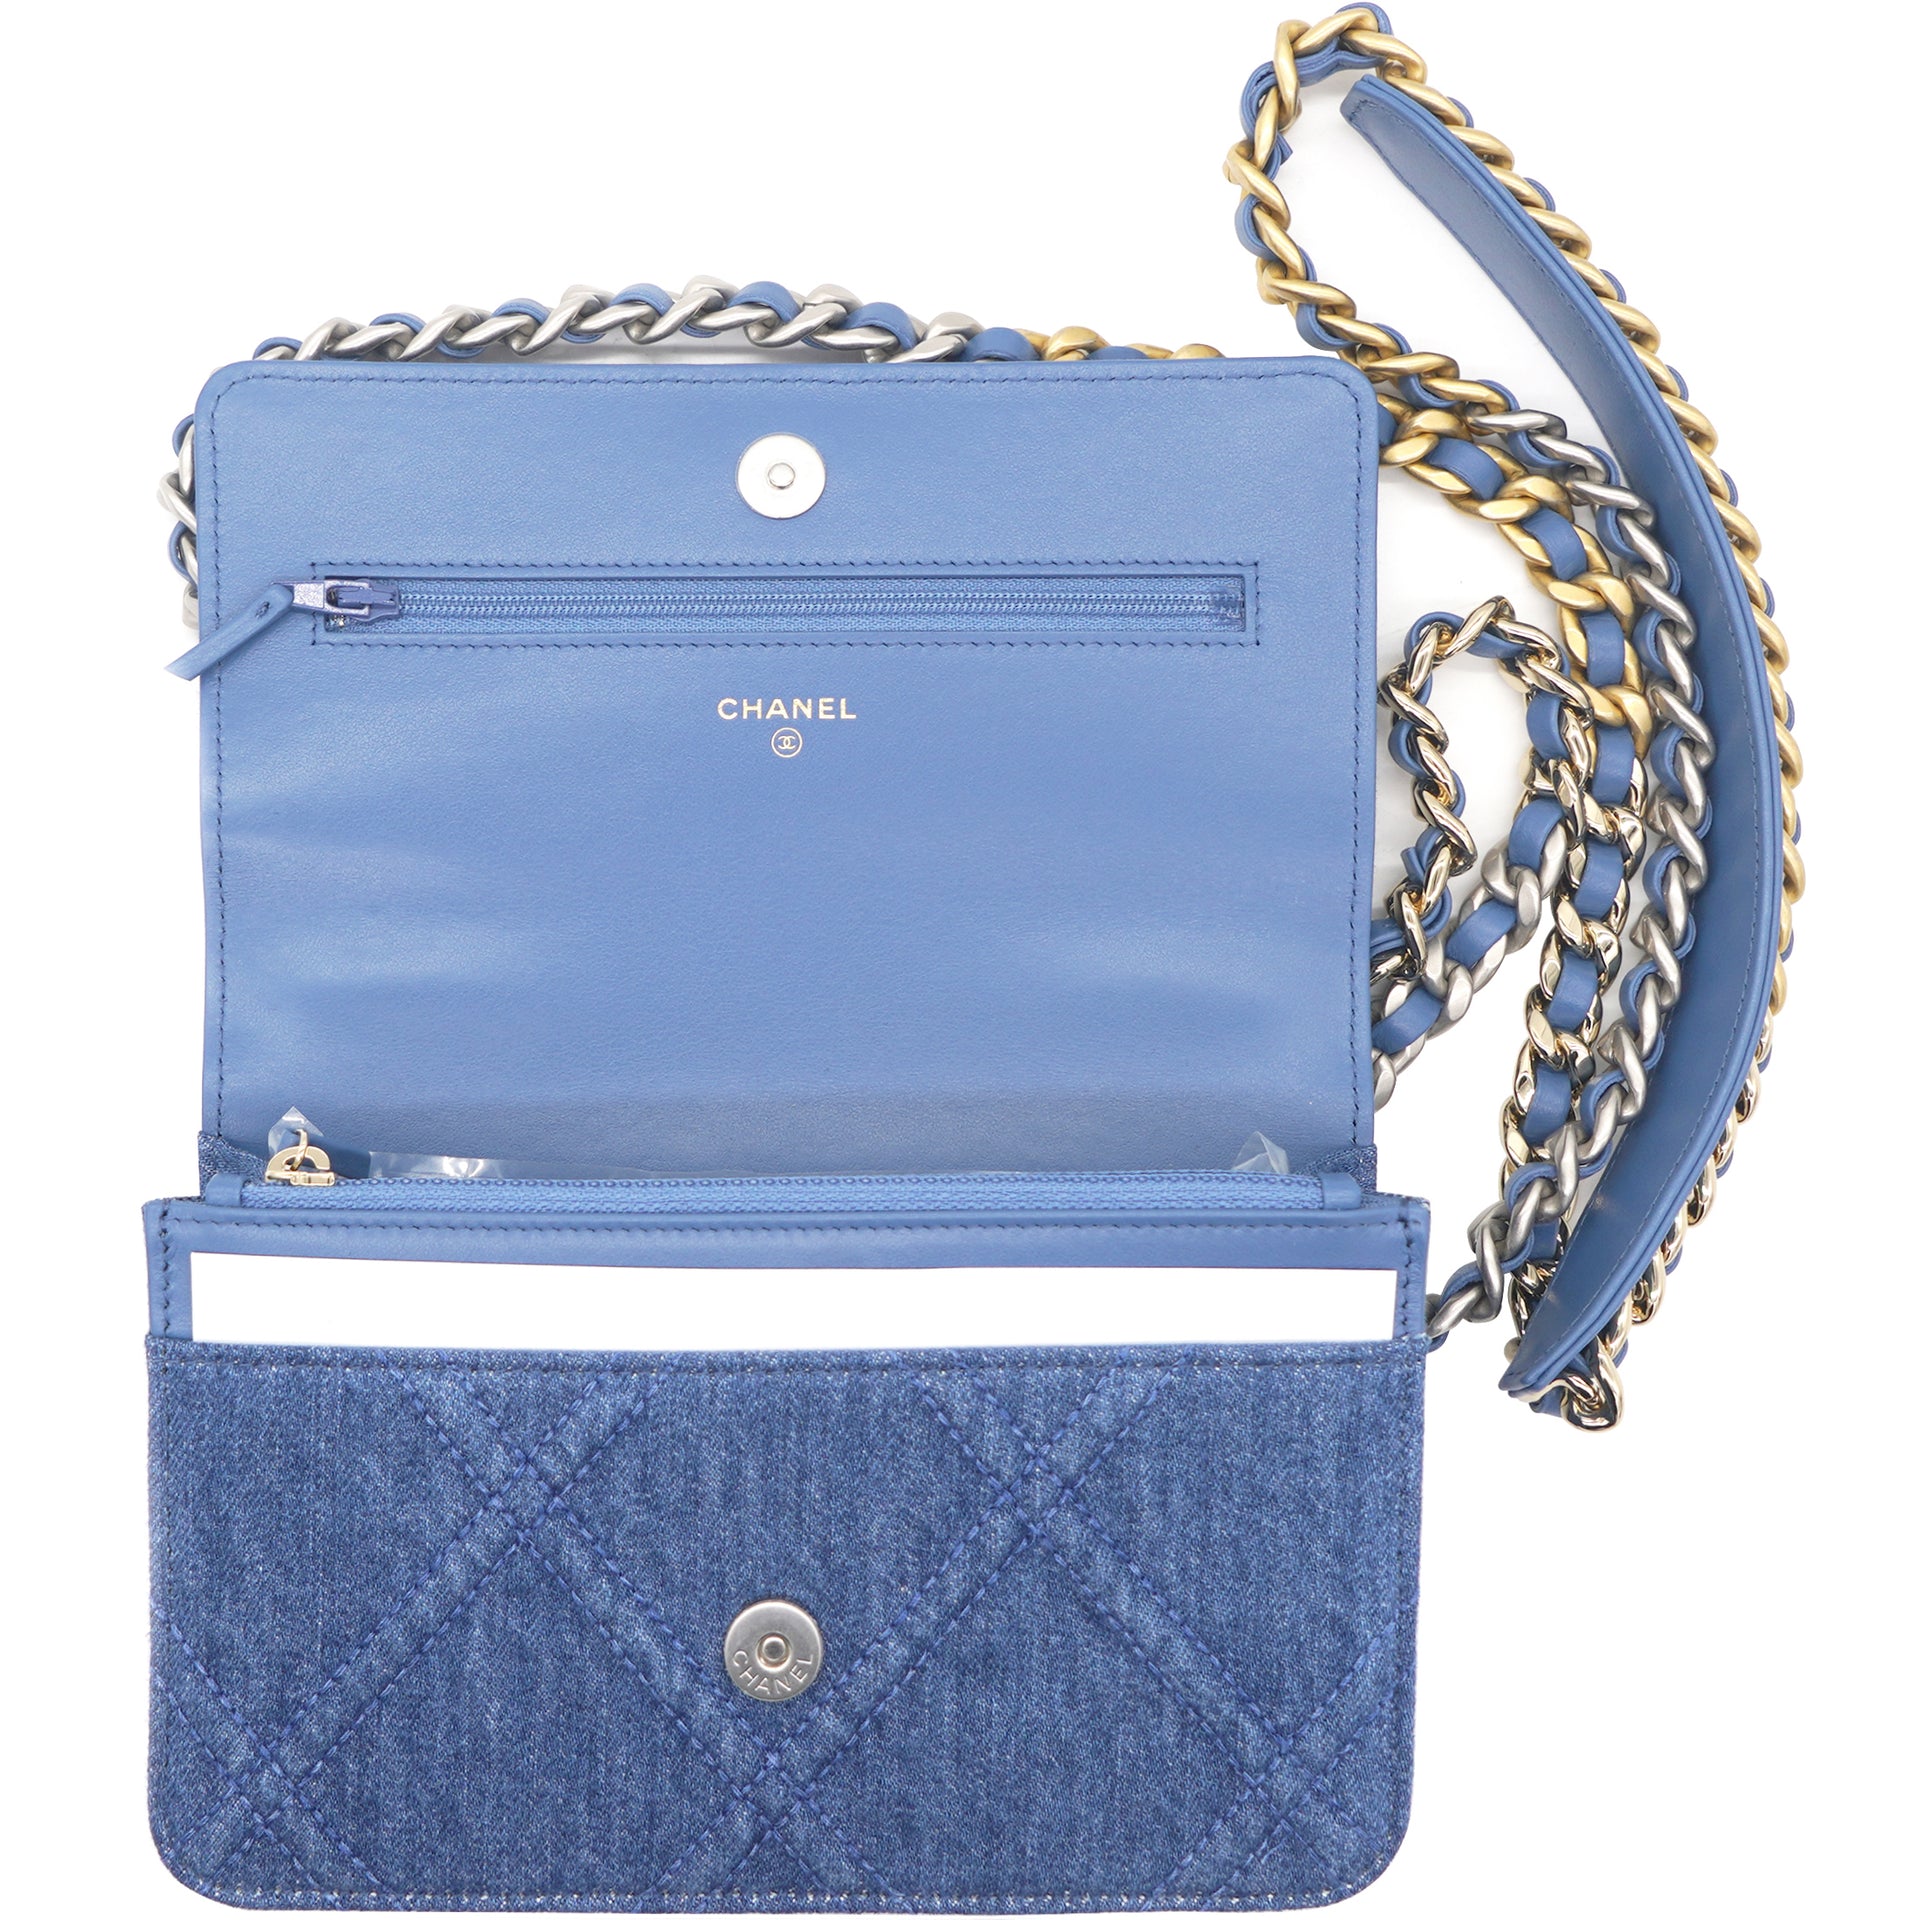 blue patent leather chanel bag